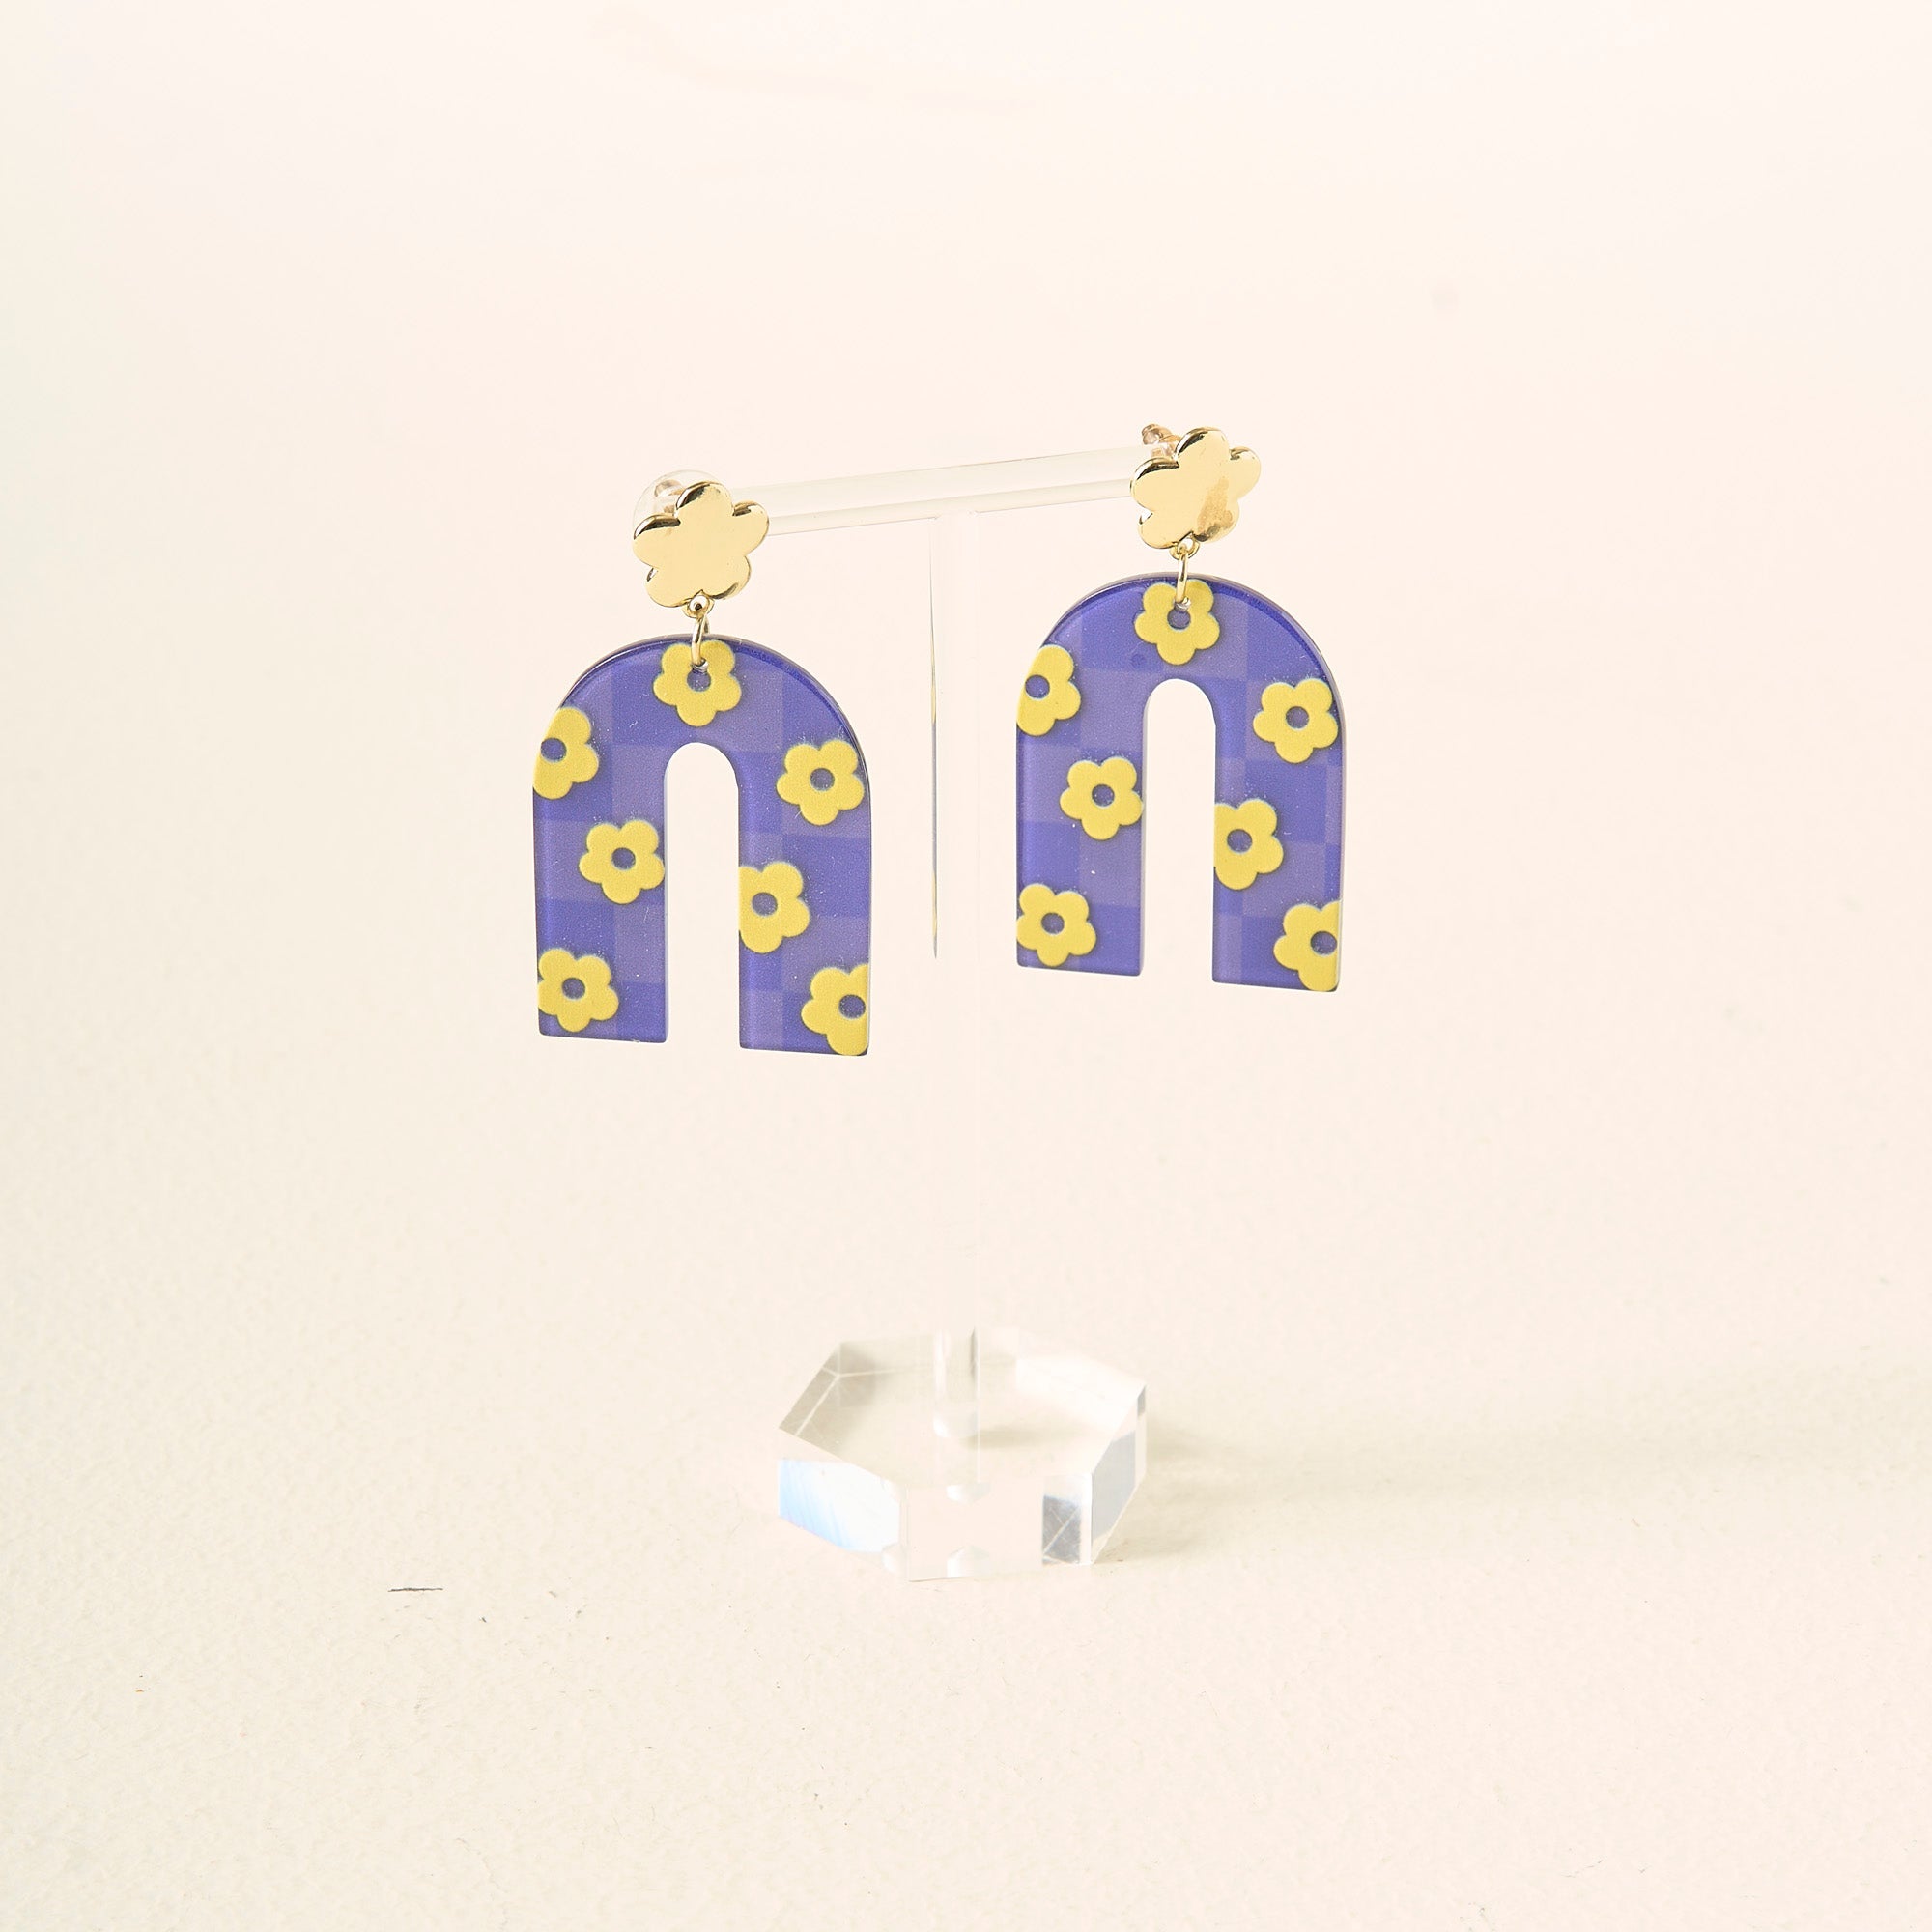 Game Day Acrylic Earrings - 8 Colors Available!